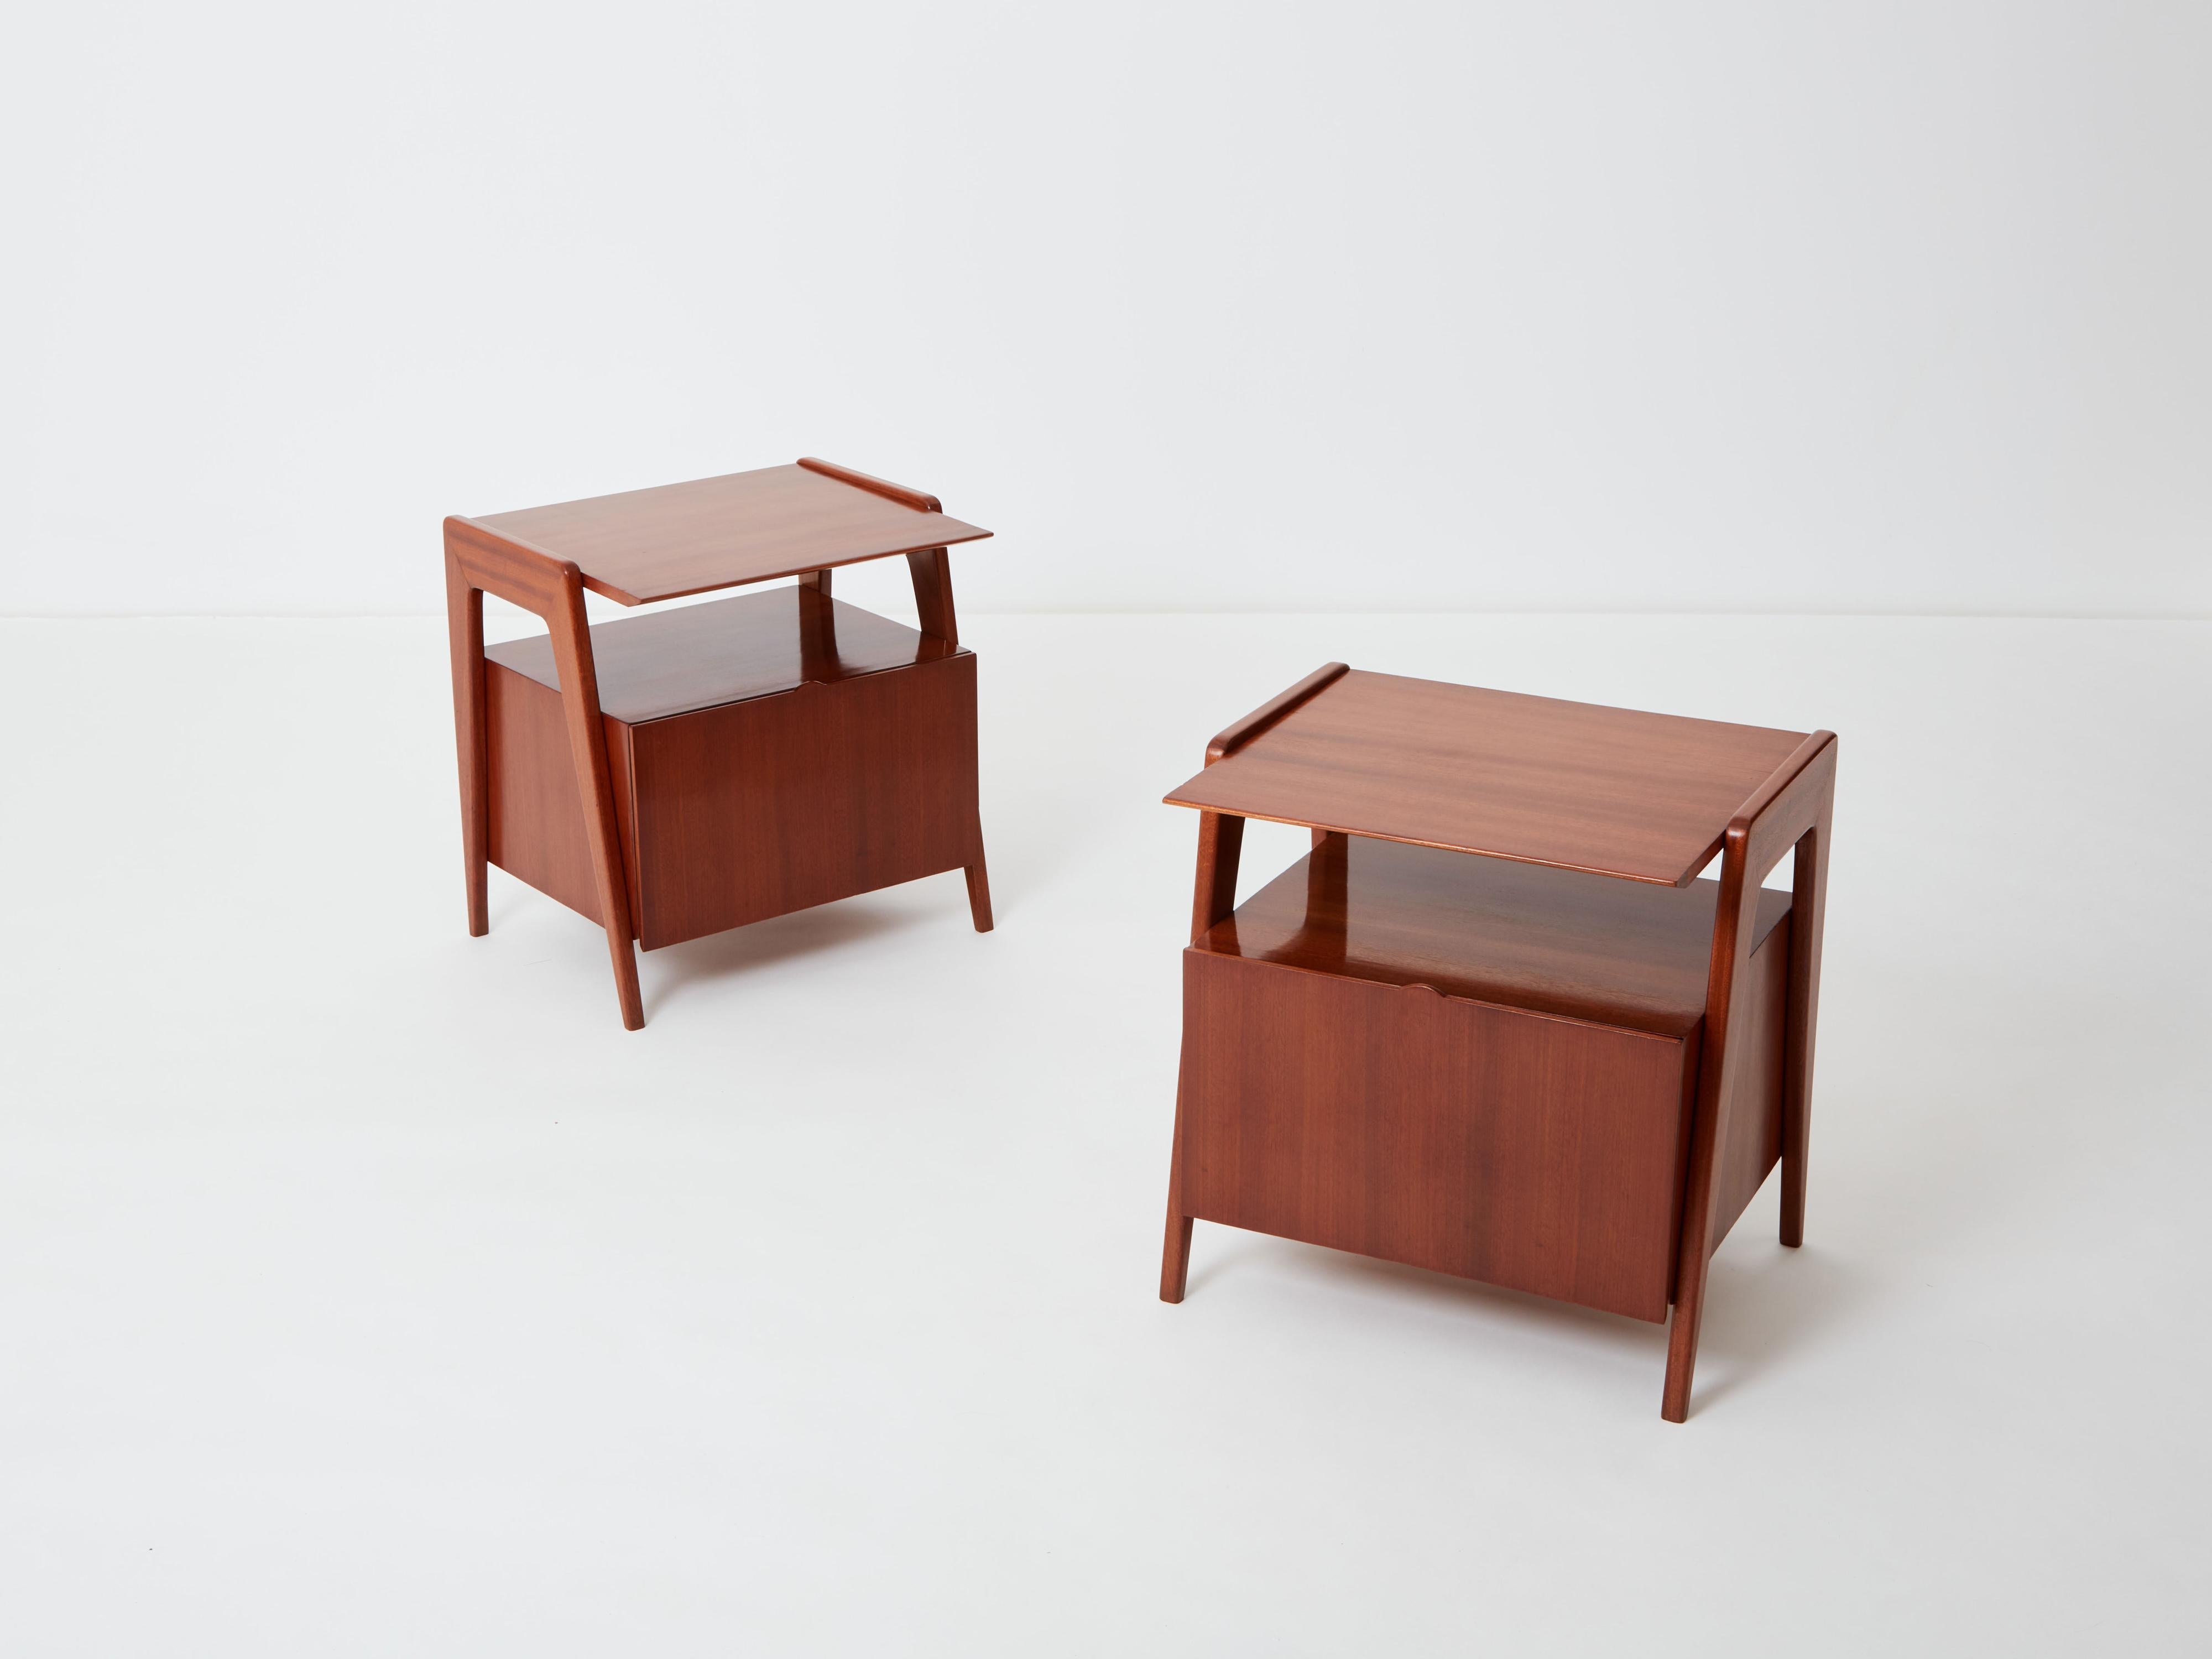 This rare pair of two-tier bedside tables by Italian designer Silvio Cavatorta was created in the early 1950s and entirely made of mahogany wood. These tables are typical of the timeless Italian Mid-Century style in the 1950s to 1960s era. They have